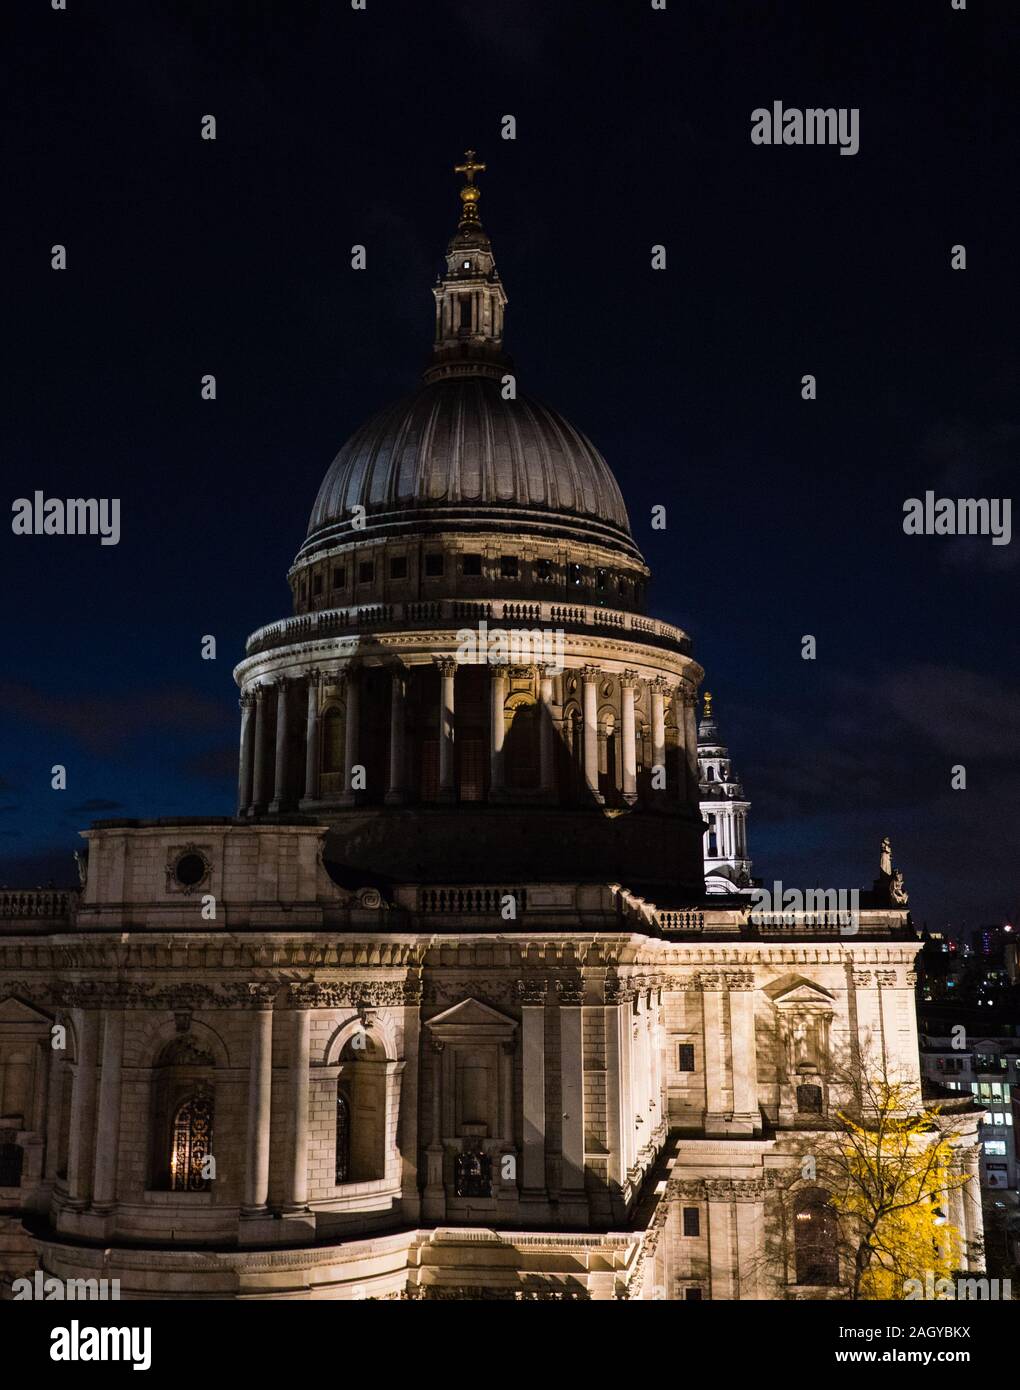 St Paul's Cathedral, Night Time, London, Landscape, The City of London, England, UK, GB. Stock Photo